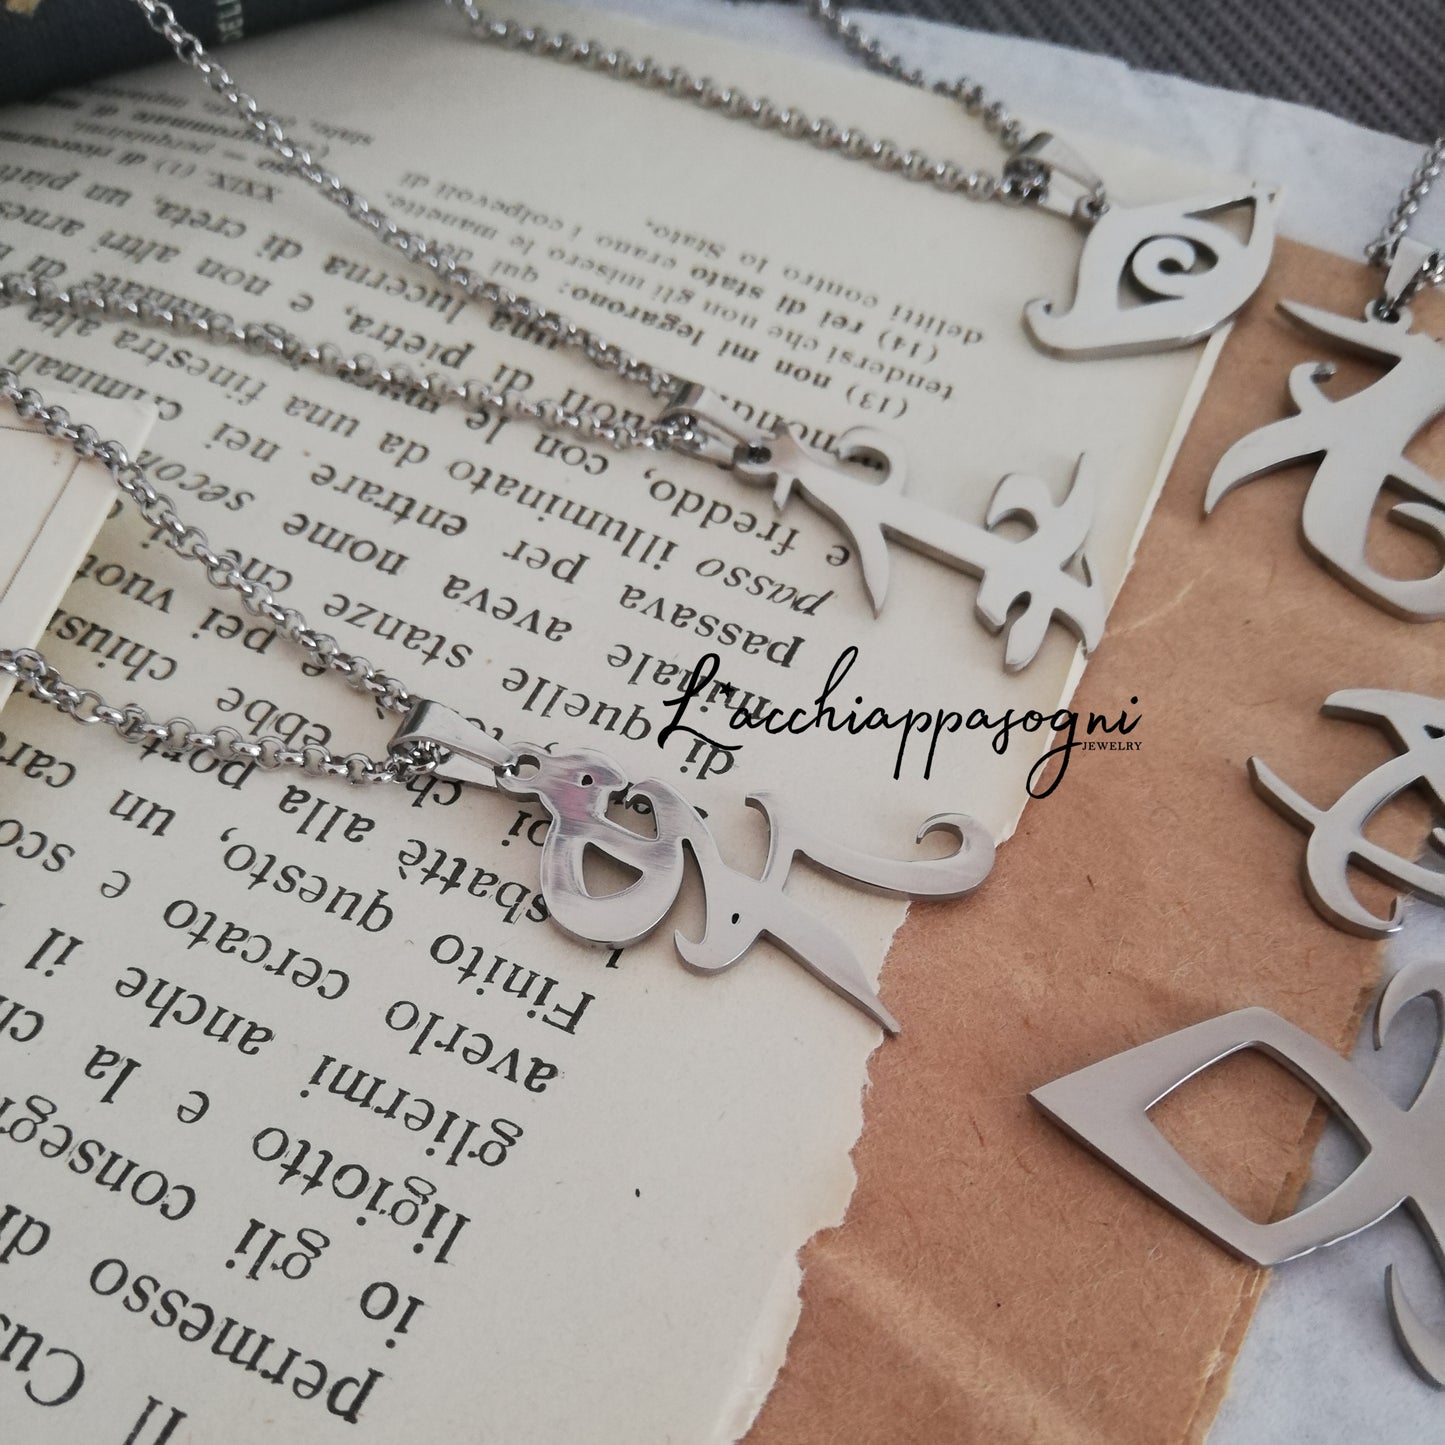 Shadowhunters Rune necklace